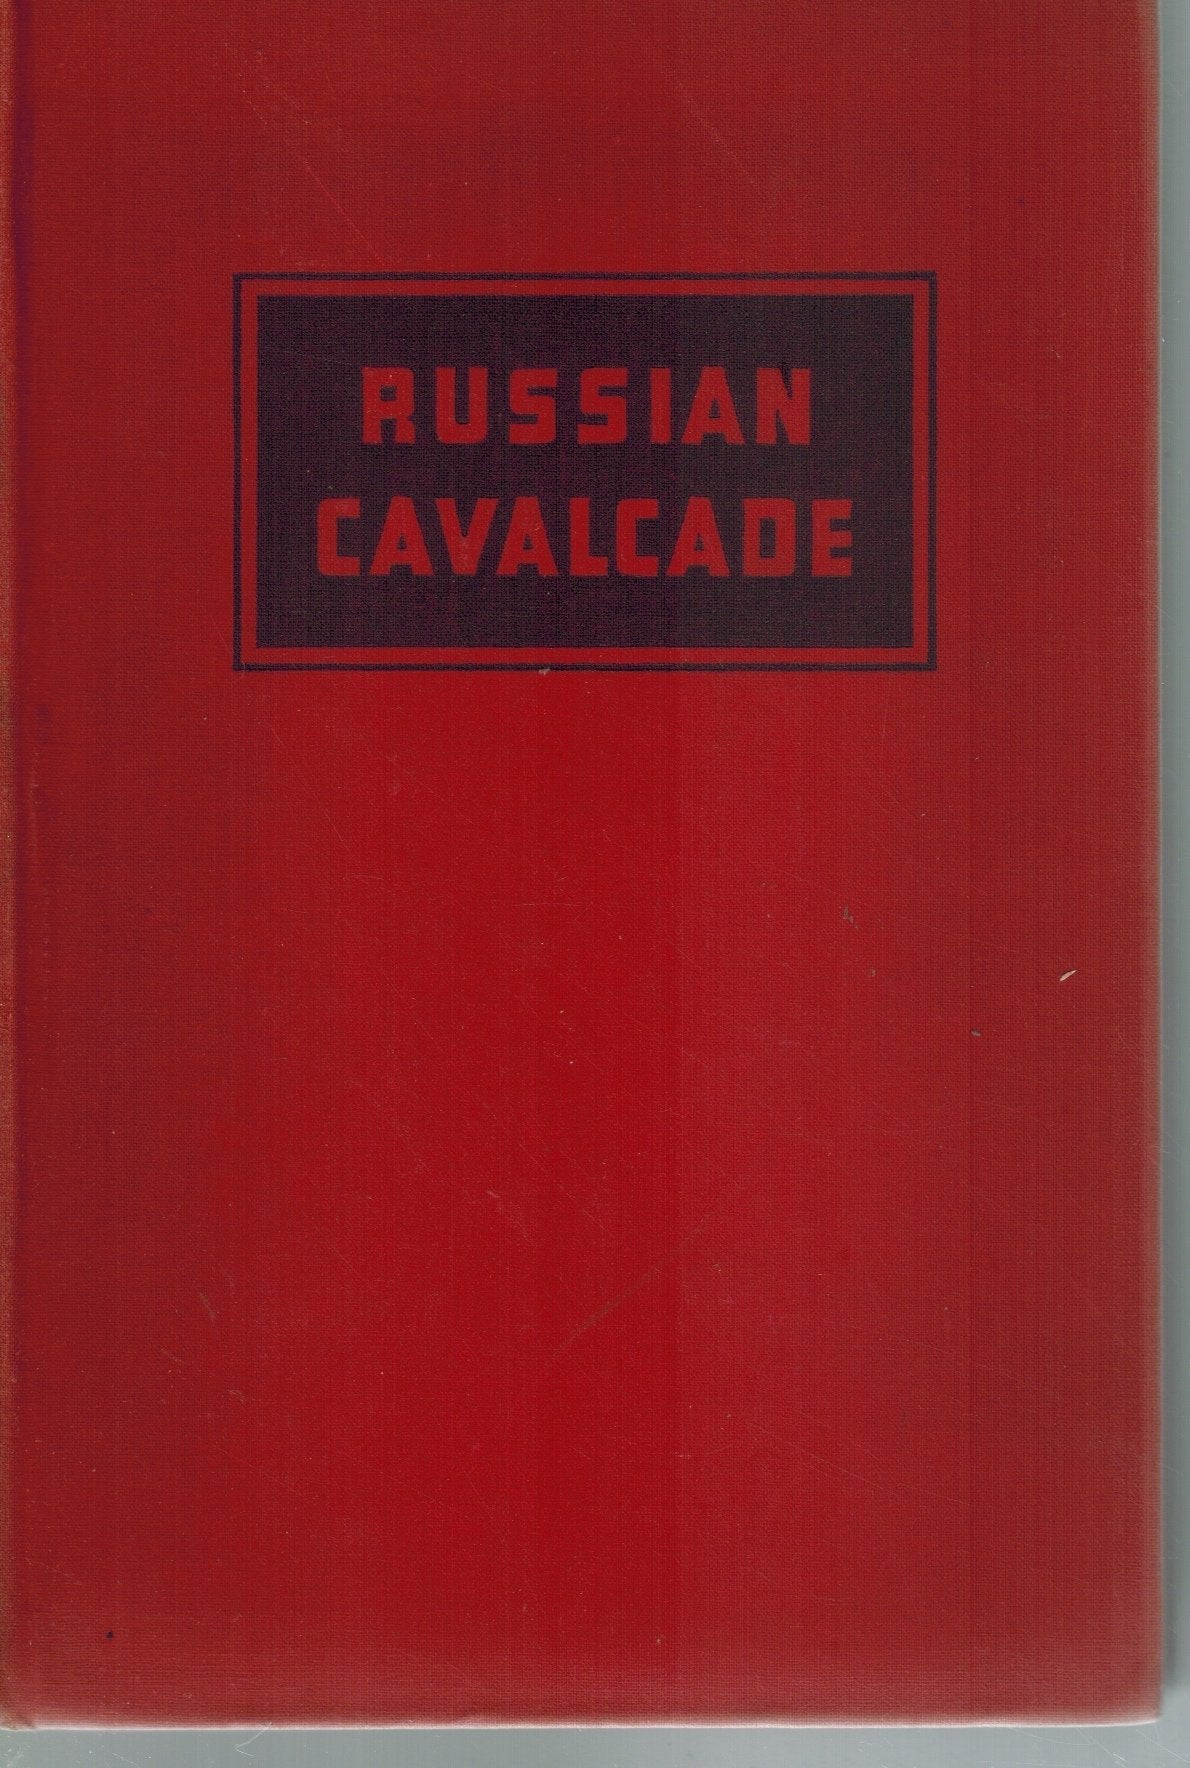 RUSSIAN CAVALCADE  A Military Record  by Parry, Albert